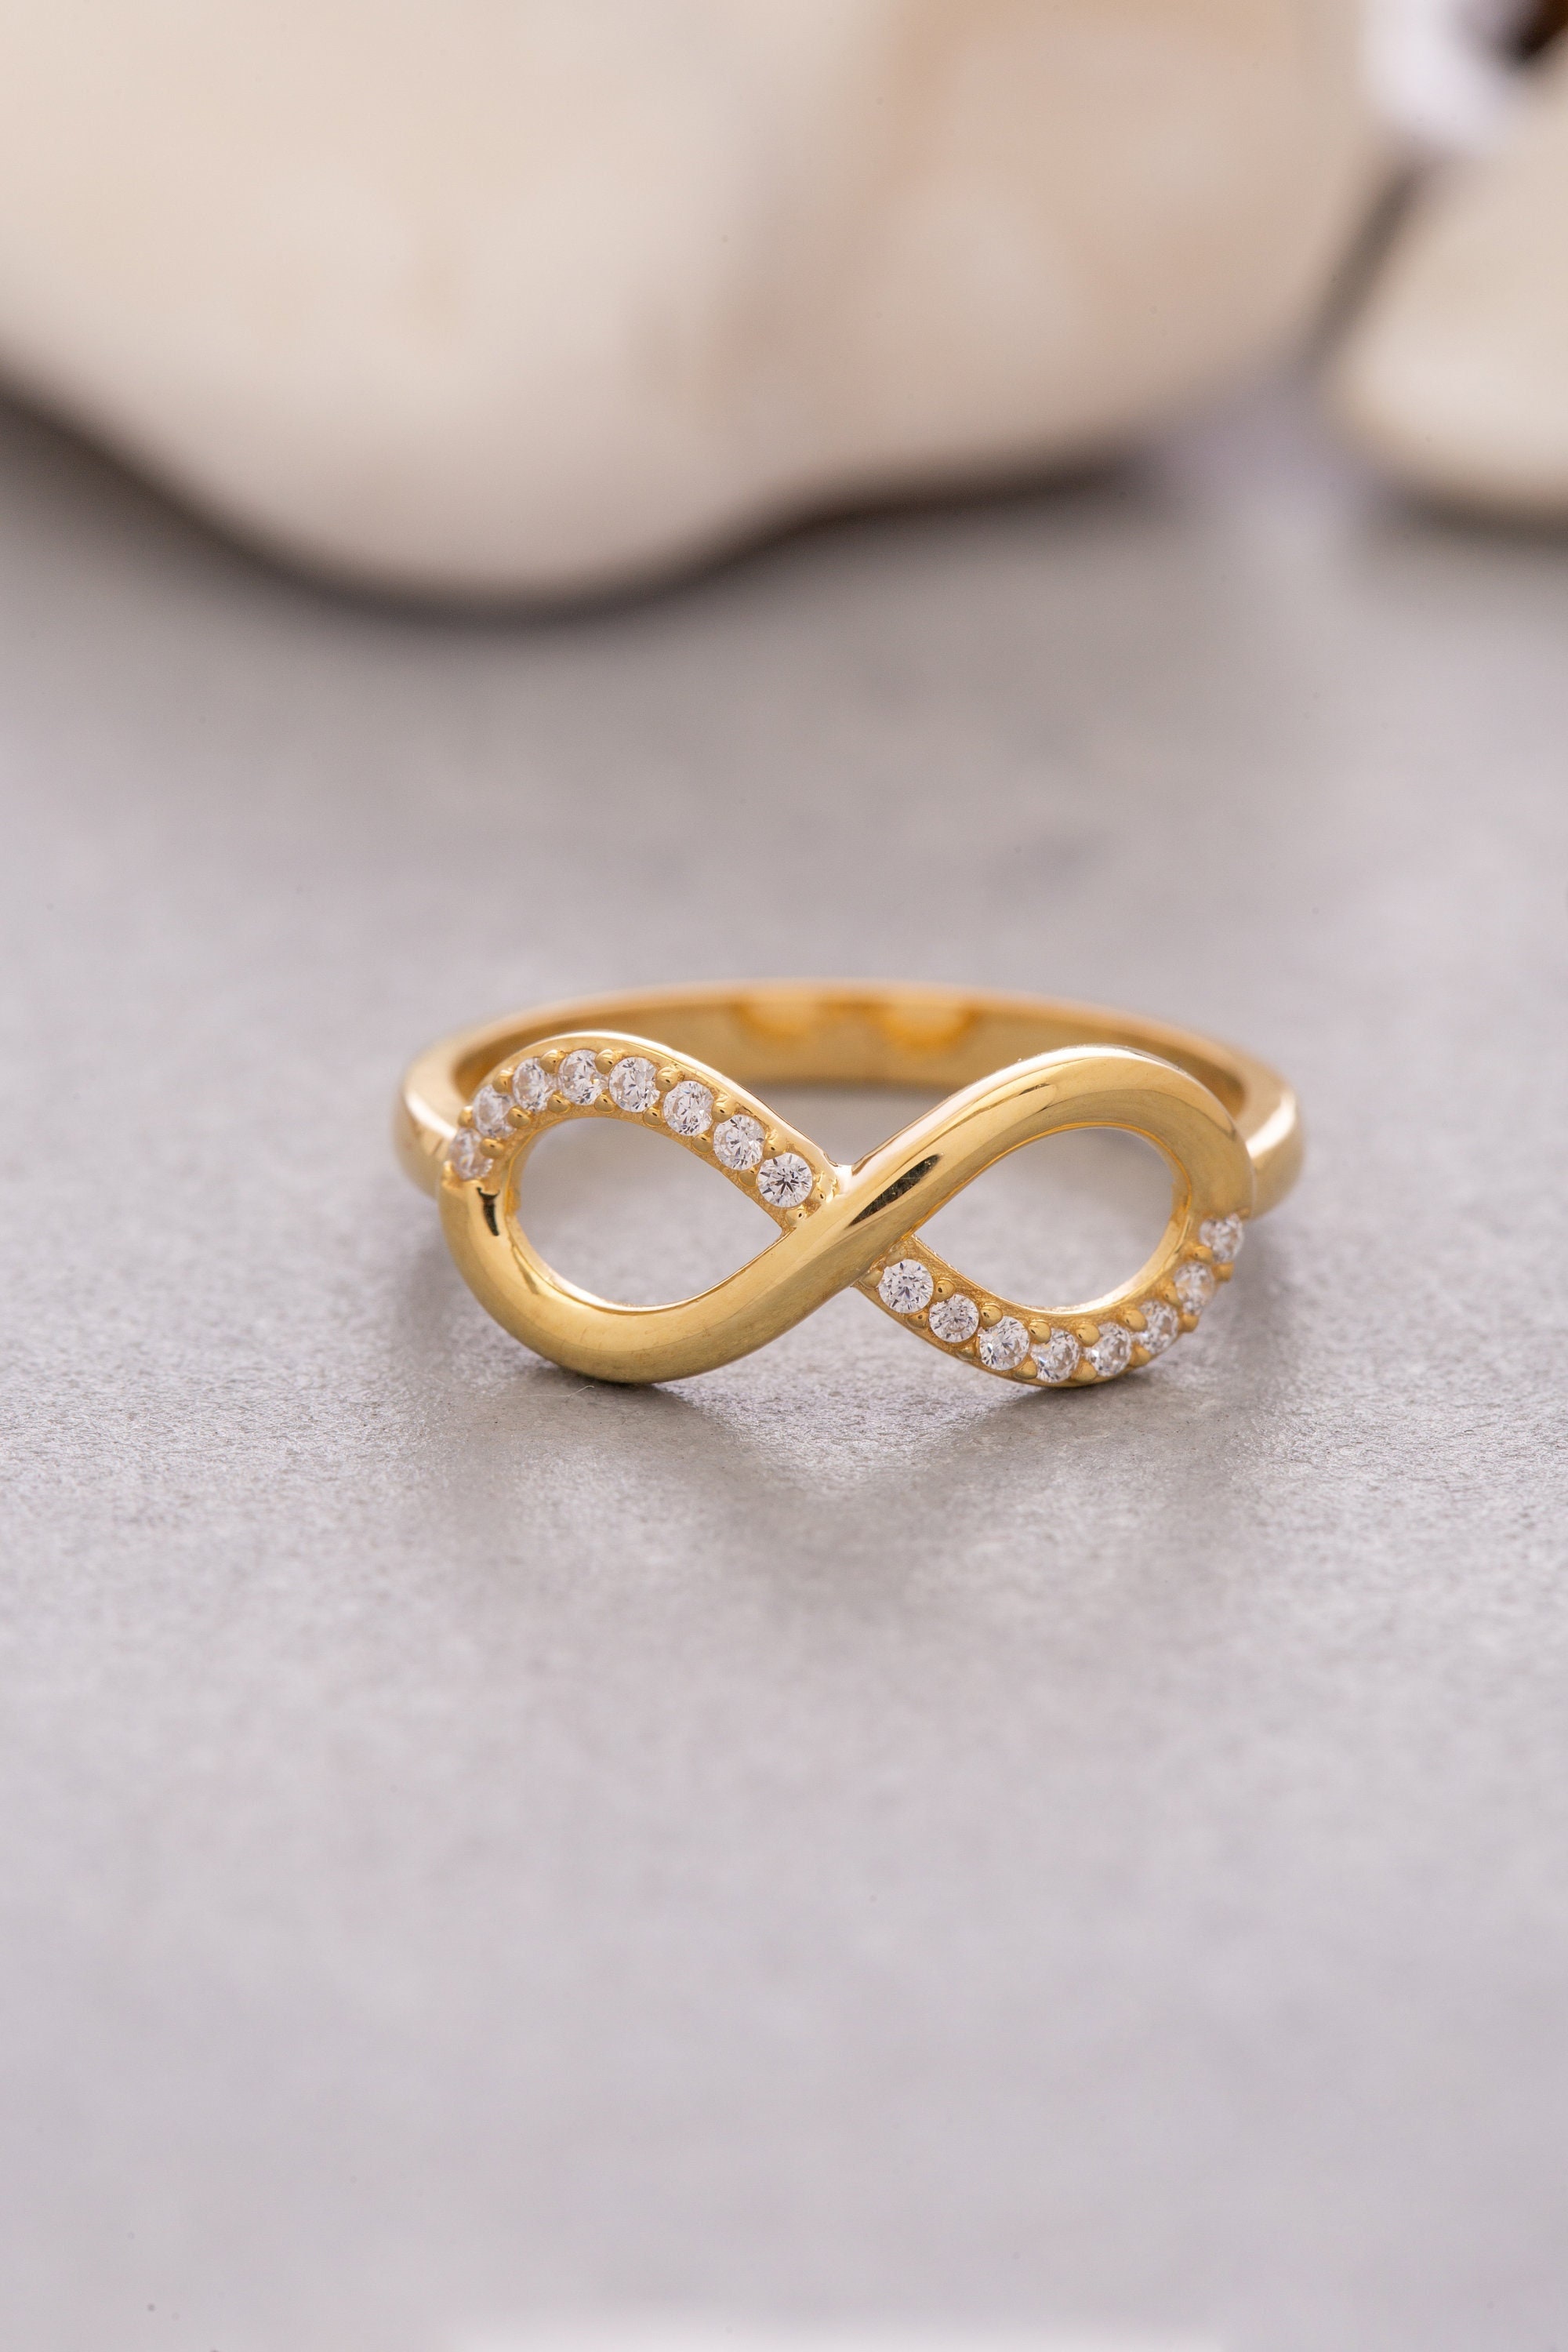 Infinity Knot Wedding Band Rose Gold Infinity Ring Anniversary Ring | La  More Design